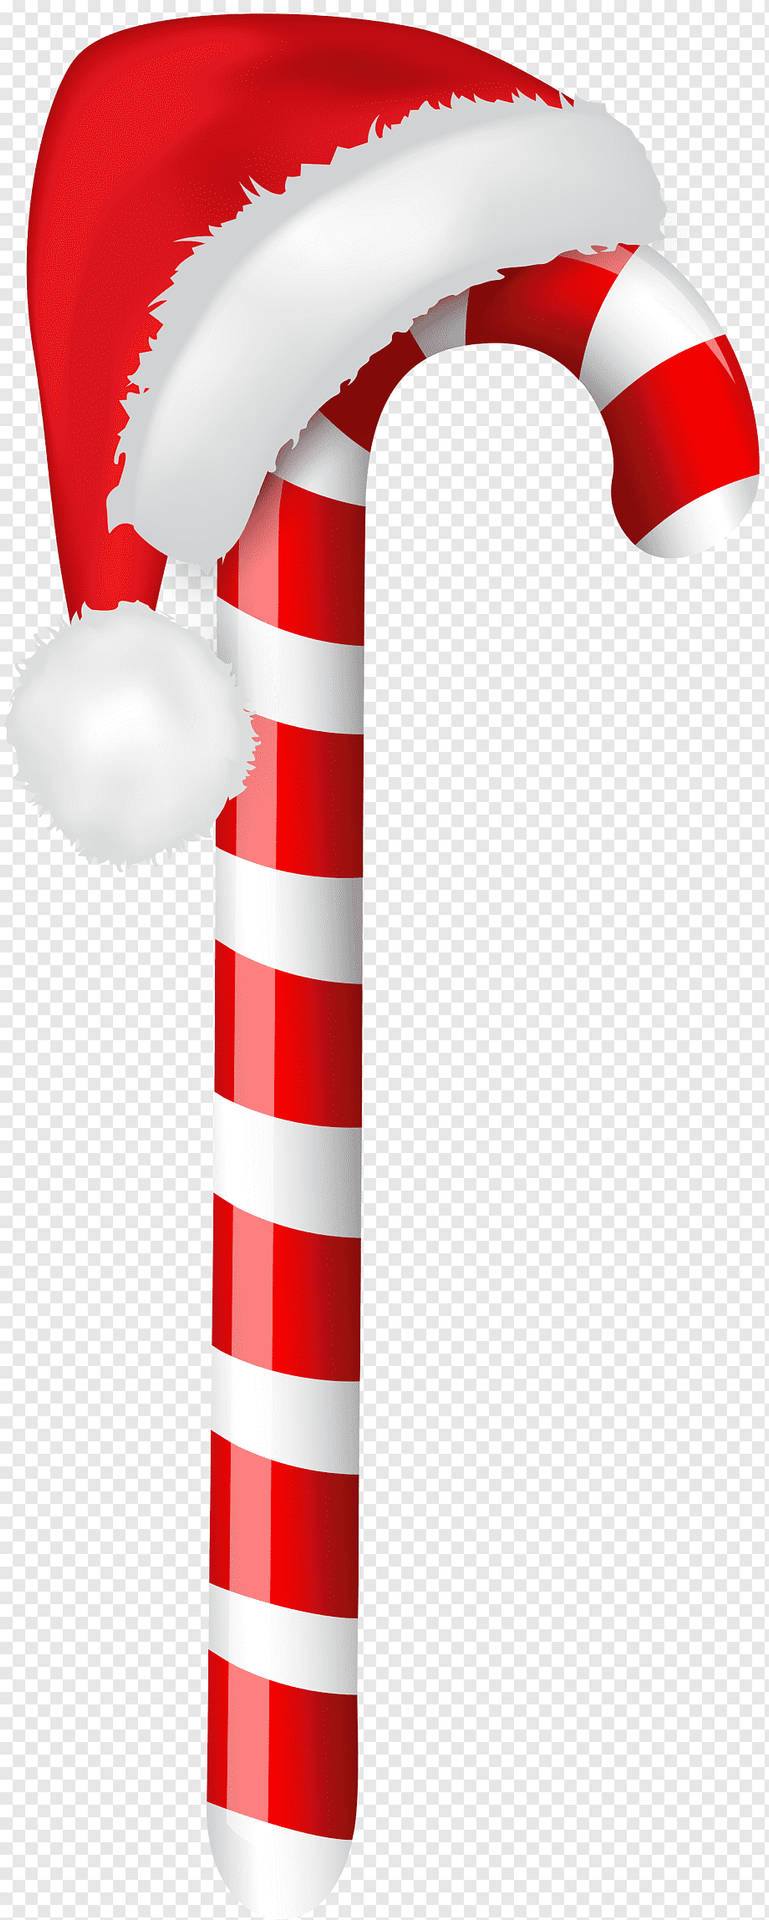 Candy Cane 920X2298 Wallpaper and Background Image